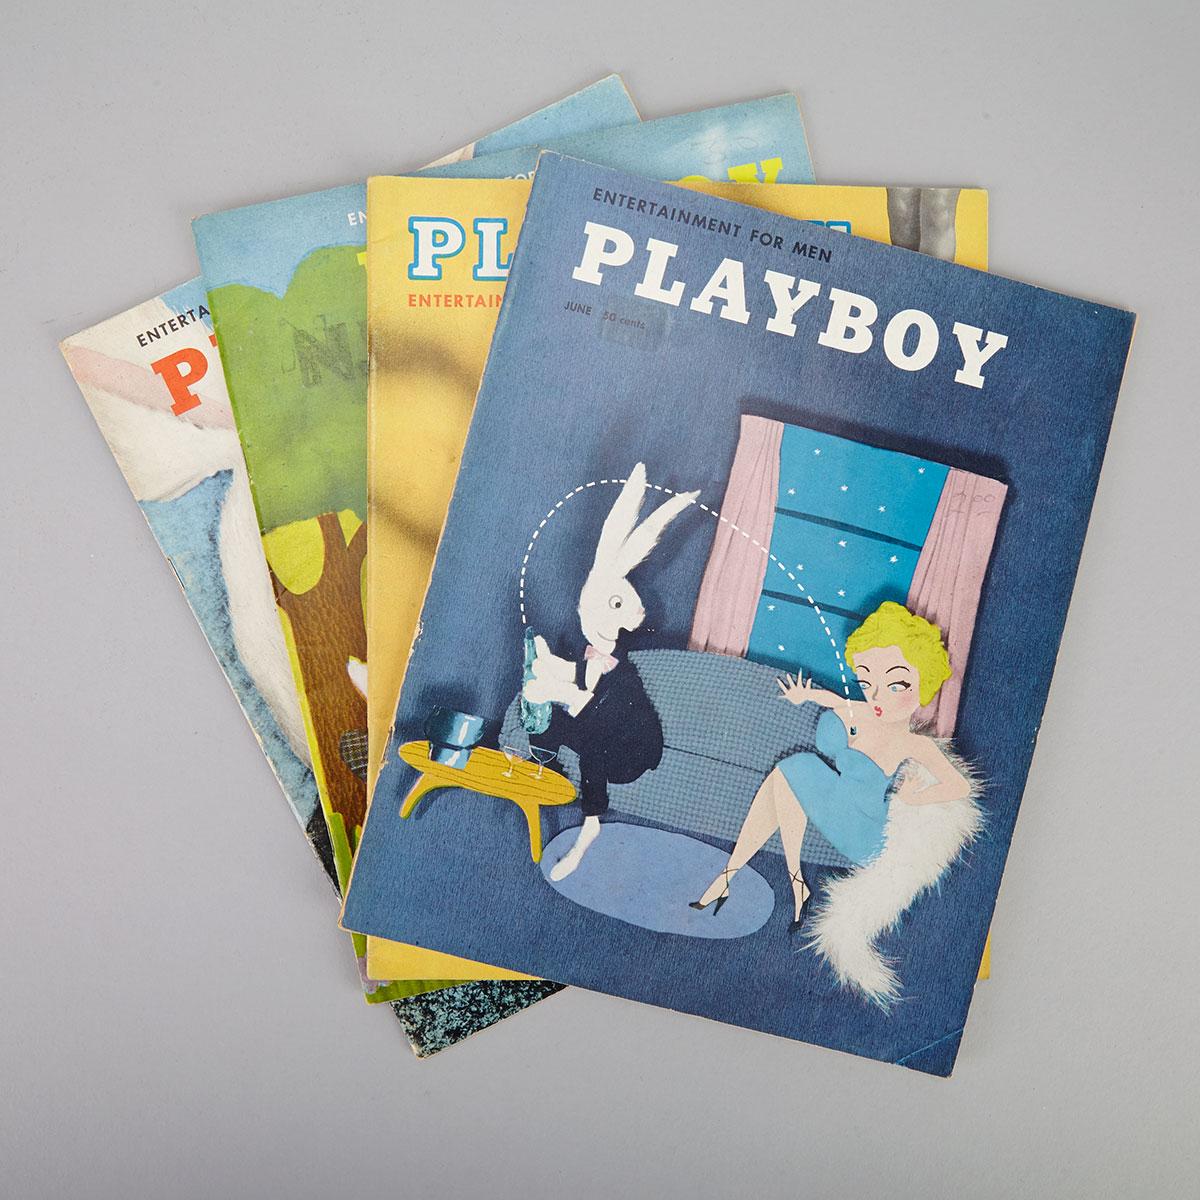 Four Early Issues of Playboy Magazine, April, May, June and July 1954